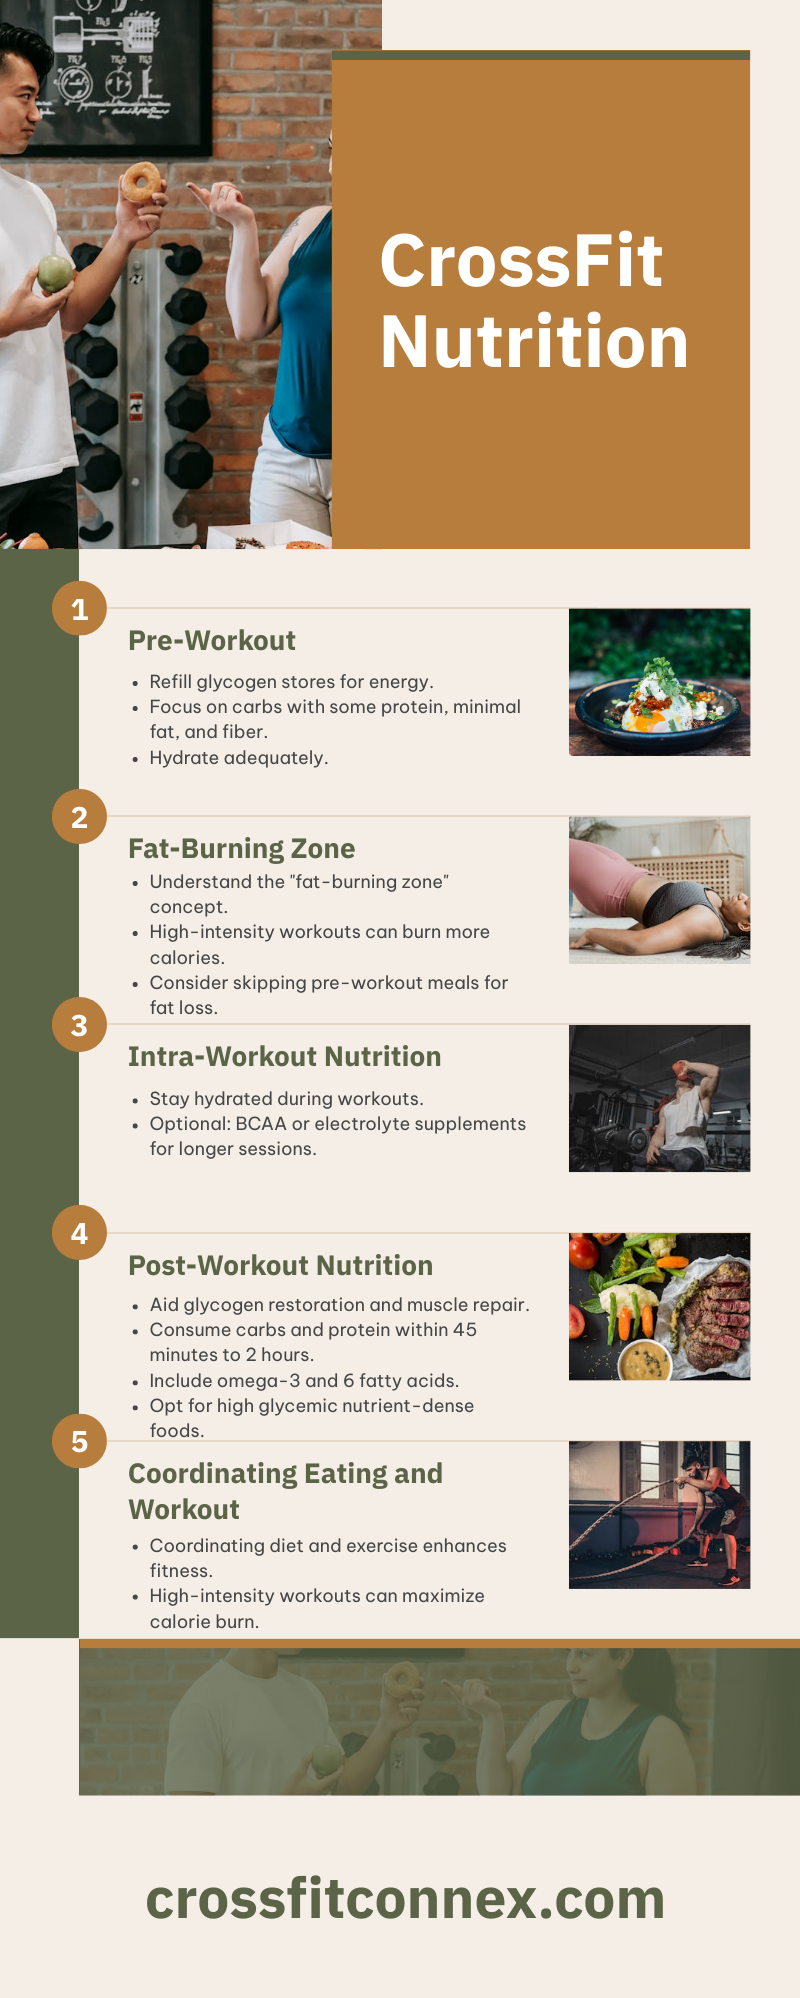 Pre and Post-Workout Nutrition for CrossFit Infographic